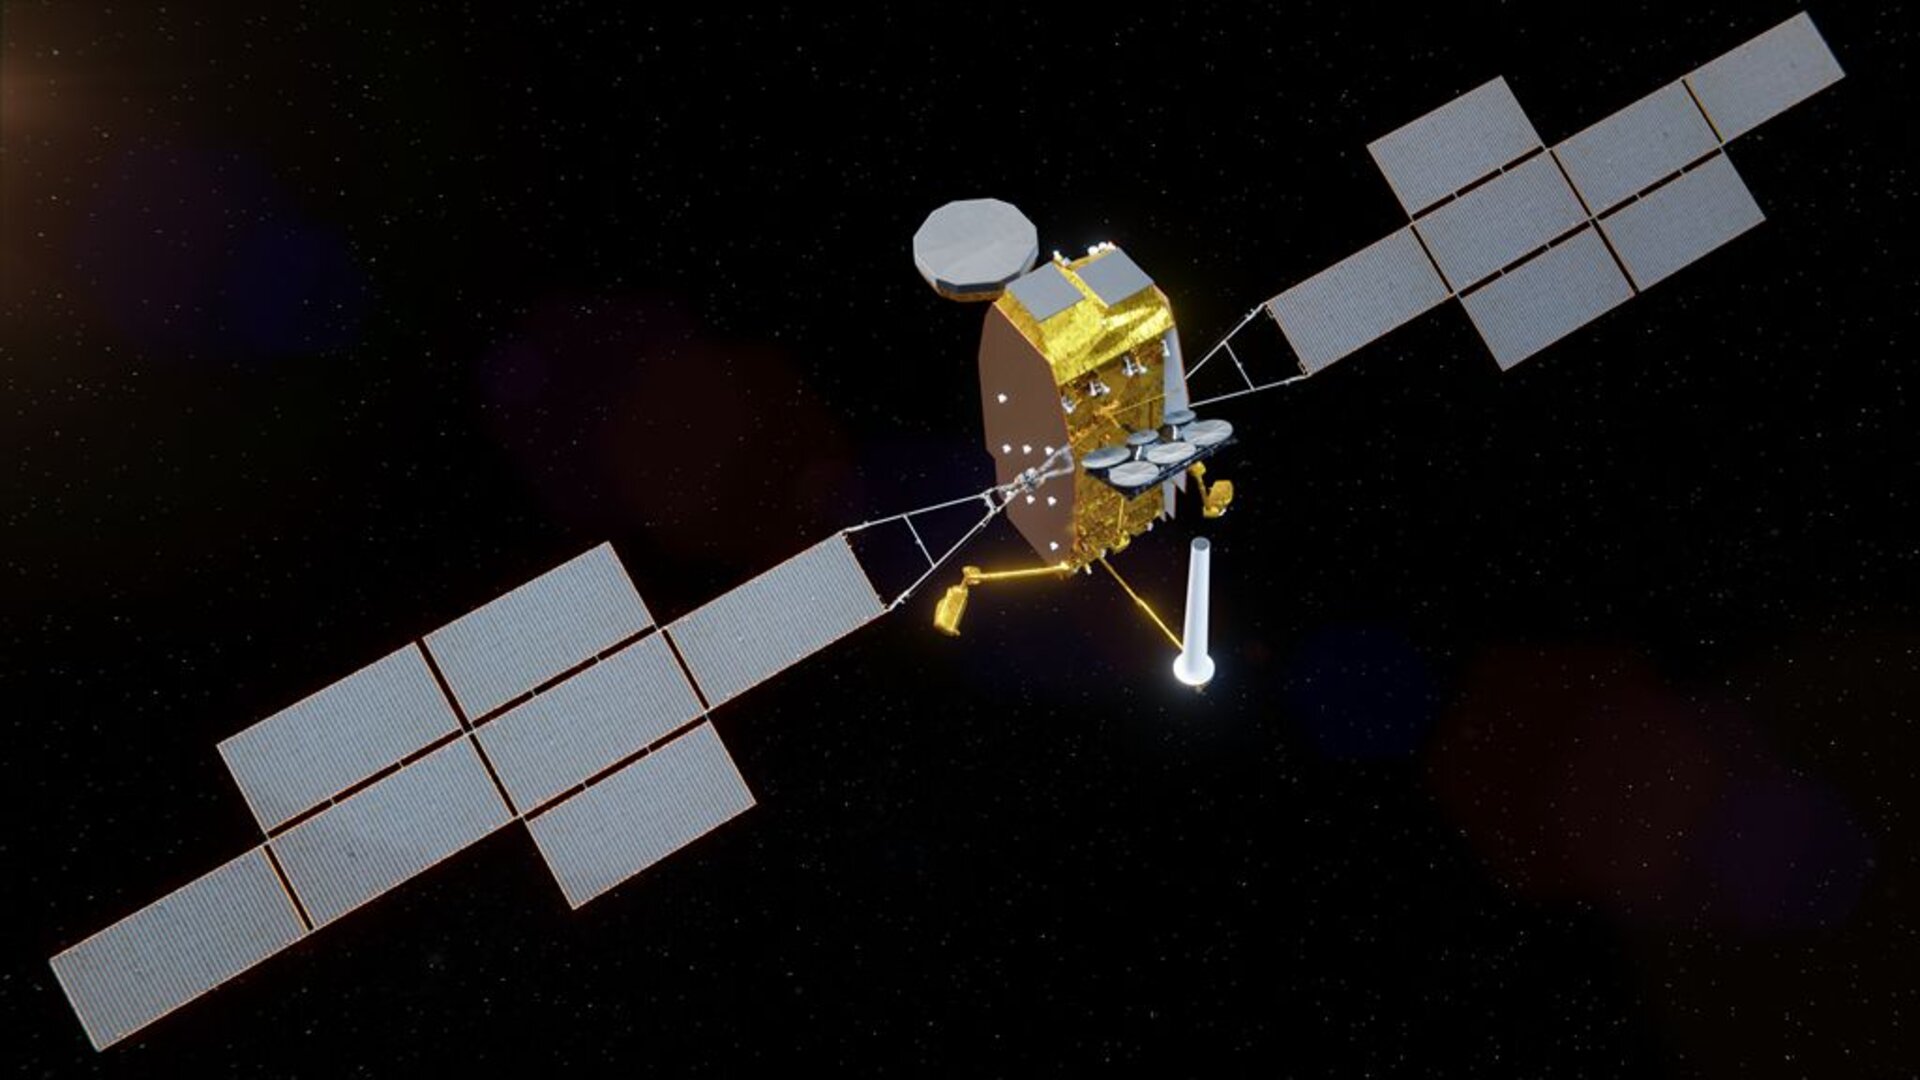 Artists impression of the SpainSat NG telecommunications satellite